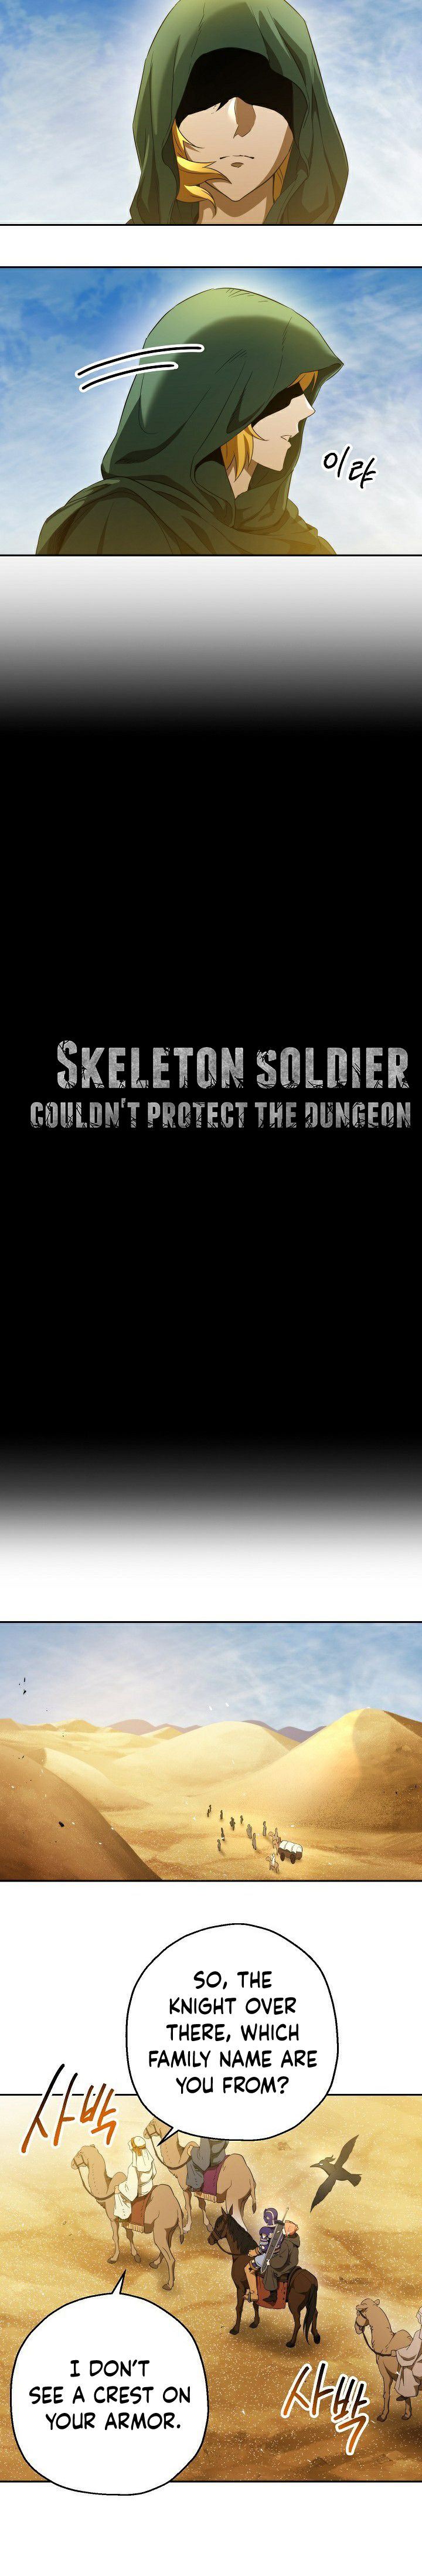 skeleton_soldier_couldnt_protect_the_dungeon_108_4